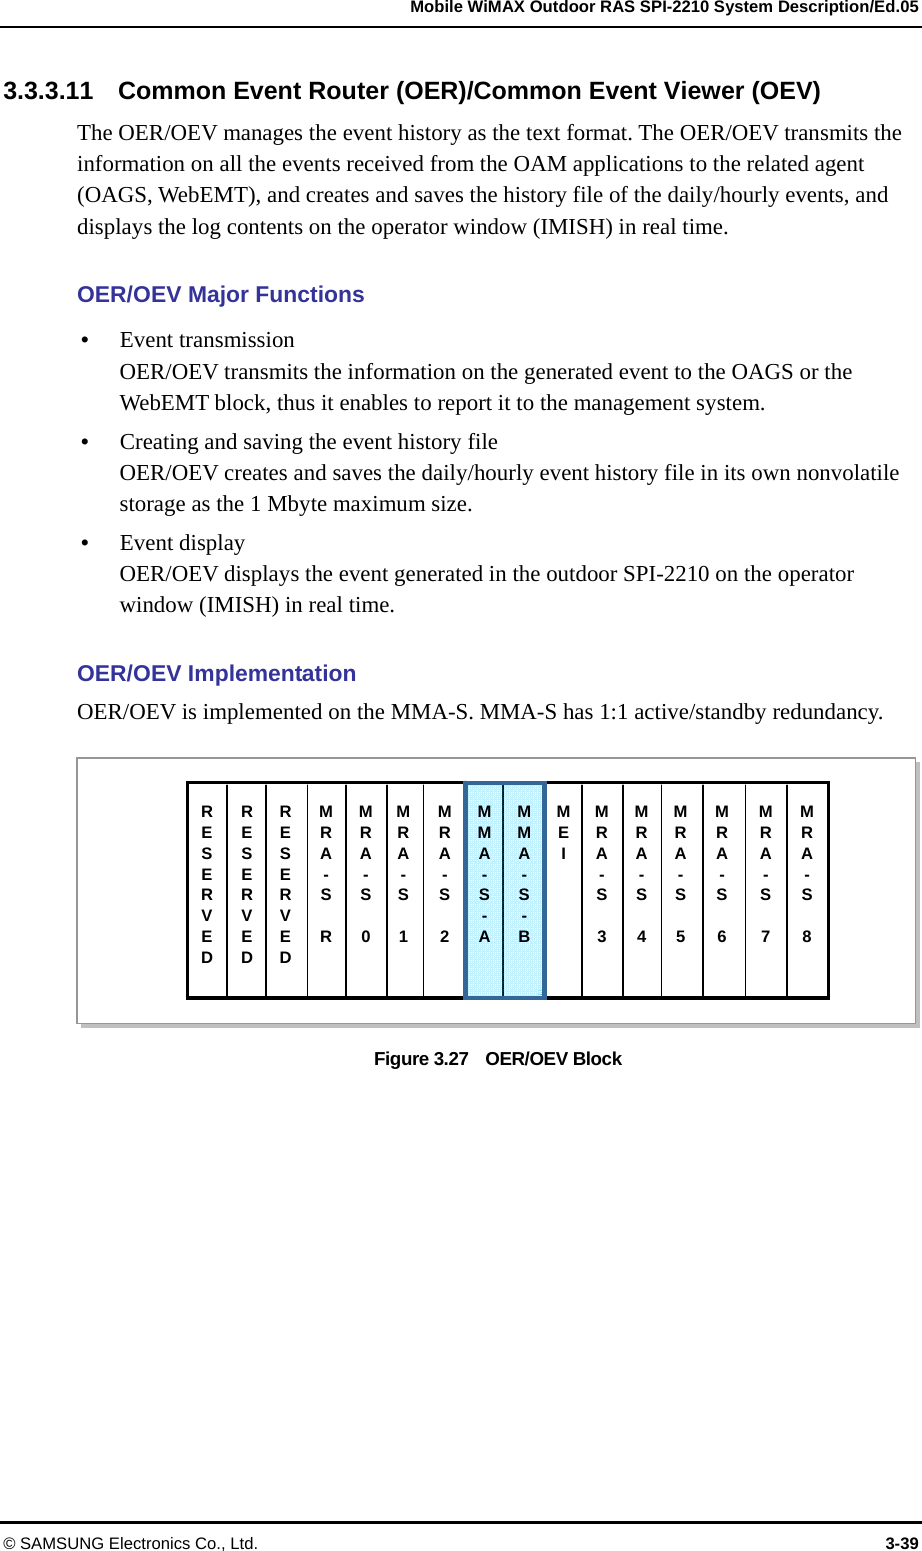   Mobile WiMAX Outdoor RAS SPI-2210 System Description/Ed.05 © SAMSUNG Electronics Co., Ltd.  3-39 3.3.3.11    Common Event Router (OER)/Common Event Viewer (OEV) The OER/OEV manages the event history as the text format. The OER/OEV transmits the information on all the events received from the OAM applications to the related agent (OAGS, WebEMT), and creates and saves the history file of the daily/hourly events, and displays the log contents on the operator window (IMISH) in real time.    OER/OEV Major Functions  Event transmission OER/OEV transmits the information on the generated event to the OAGS or the WebEMT block, thus it enables to report it to the management system.    Creating and saving the event history file OER/OEV creates and saves the daily/hourly event history file in its own nonvolatile storage as the 1 Mbyte maximum size.  Event display   OER/OEV displays the event generated in the outdoor SPI-2210 on the operator window (IMISH) in real time.  OER/OEV Implementation OER/OEV is implemented on the MMA-S. MMA-S has 1:1 active/standby redundancy.  Figure 3.27    OER/OEV Block  RESERVED MRA- S  R MMA-S- AMMA-S- BMEI RESERVED RESERVED MRA- S 0MRA- S 1MRA- S 2MRA- S 3MRA- S 4MRA- S 5MRA- S  6 MRA- S  7 MRA- S  8 